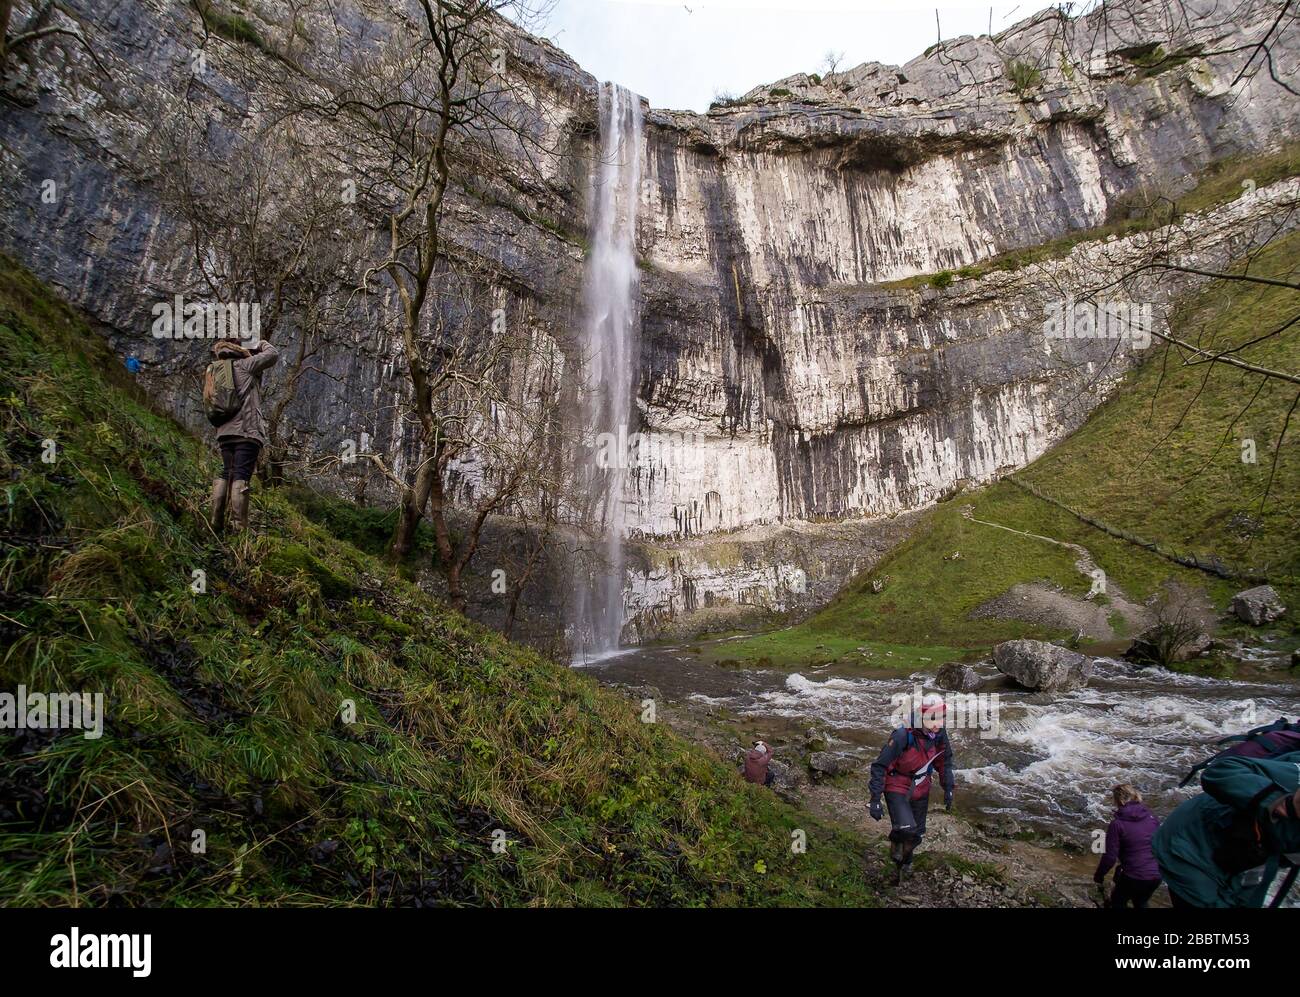 Water flowing over Malham Cove. December 6th 2015, following a period of heavy rain, Malham Cove temporarily becomes the UK's highest free falling waterfall. The 80m high vertical limestone cliff in the heart of the Yorkshire Dales National Park was formed in the last ice age but water has not been seen to cascade from its rim in living memory (See 'additional info') © Ian Wray /Alamy Stock Photo